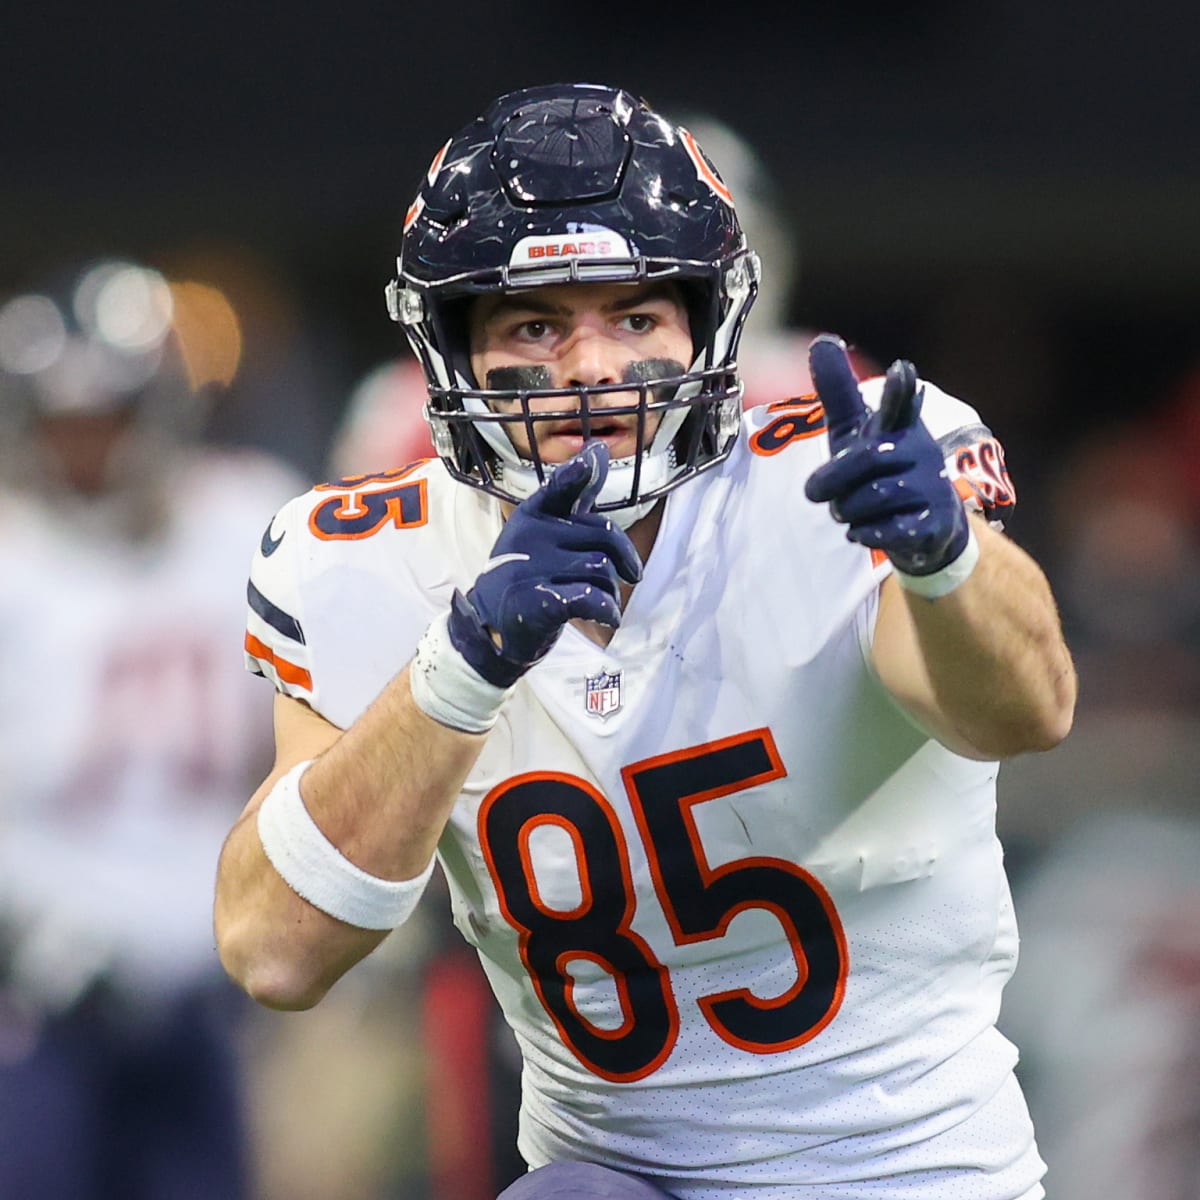 Bears' Cole Kmet receives recognition in ESPN's tight end rankings